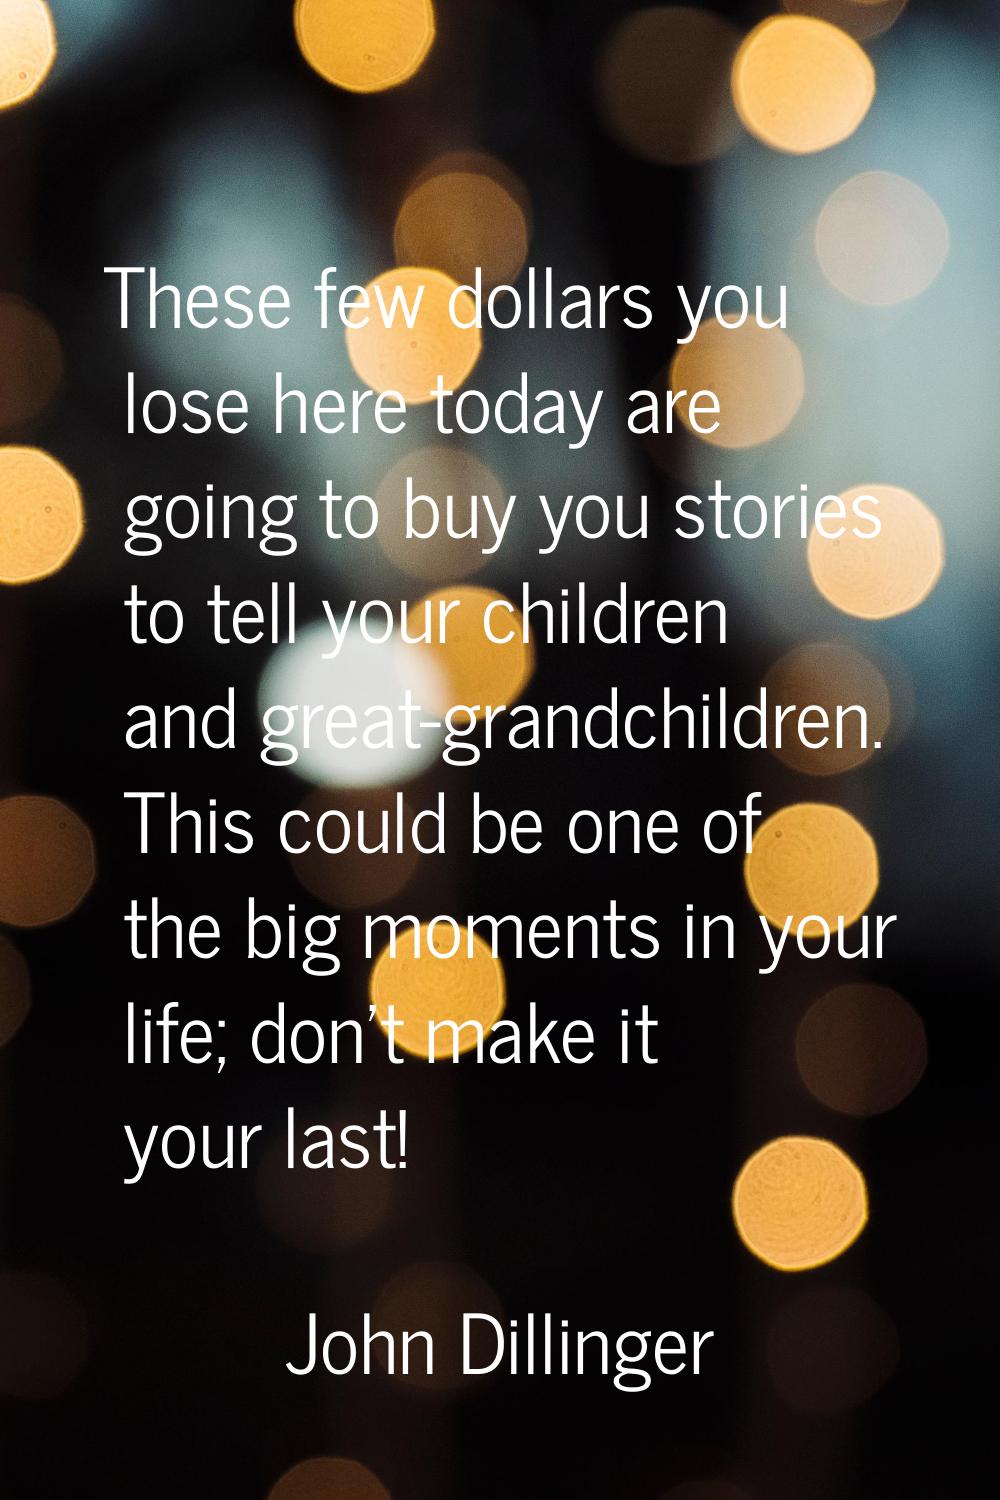 These few dollars you lose here today are going to buy you stories to tell your children and great-